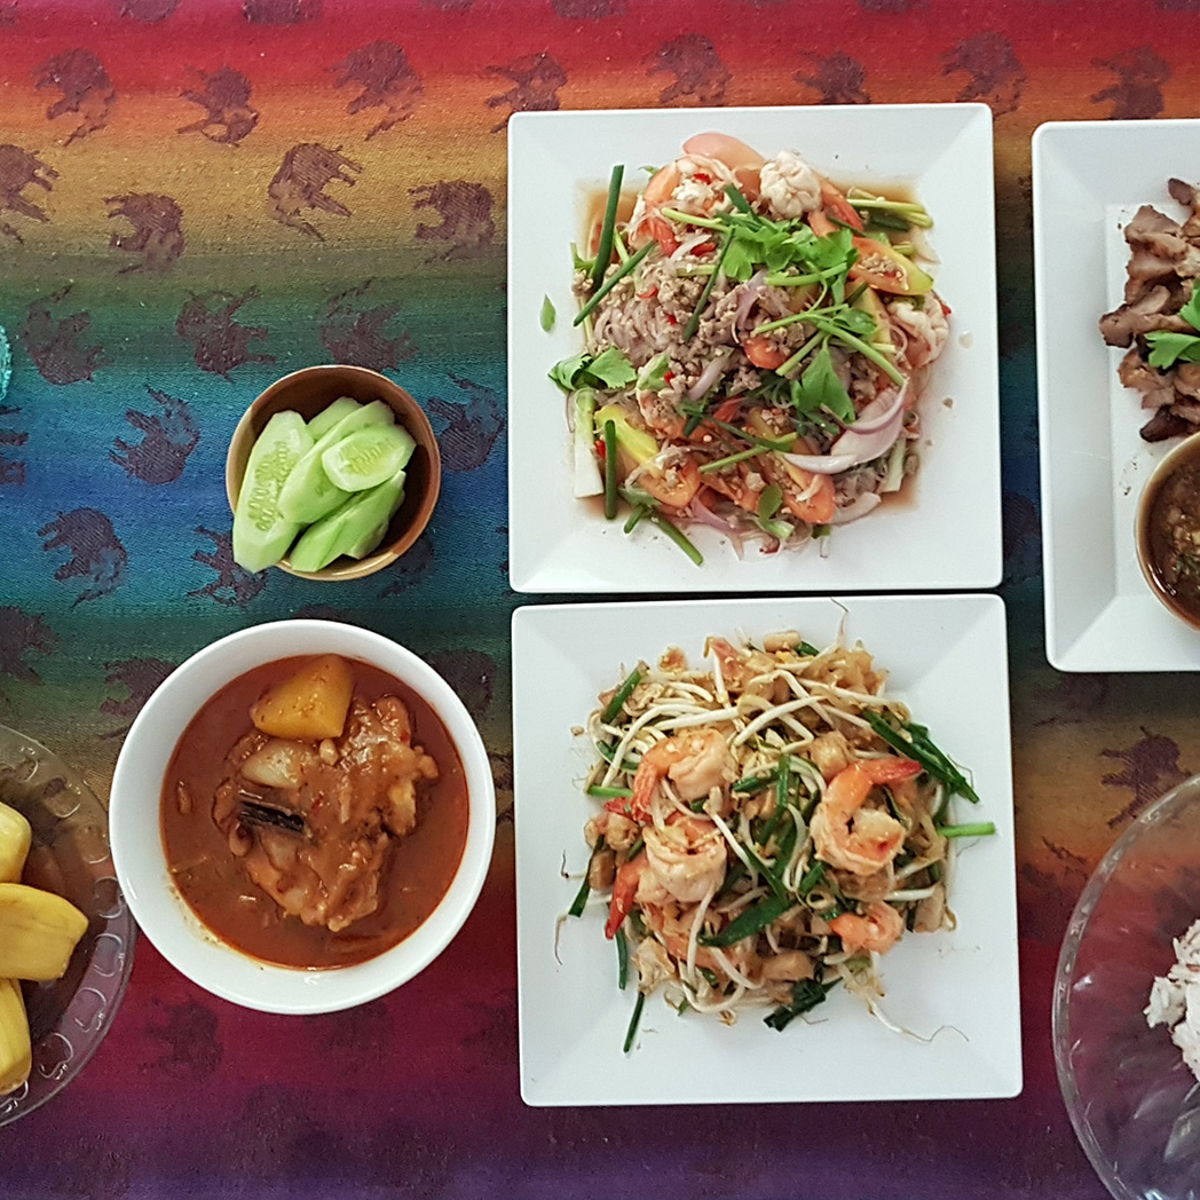 Enjoy Authentic Home Cooked Thai Food